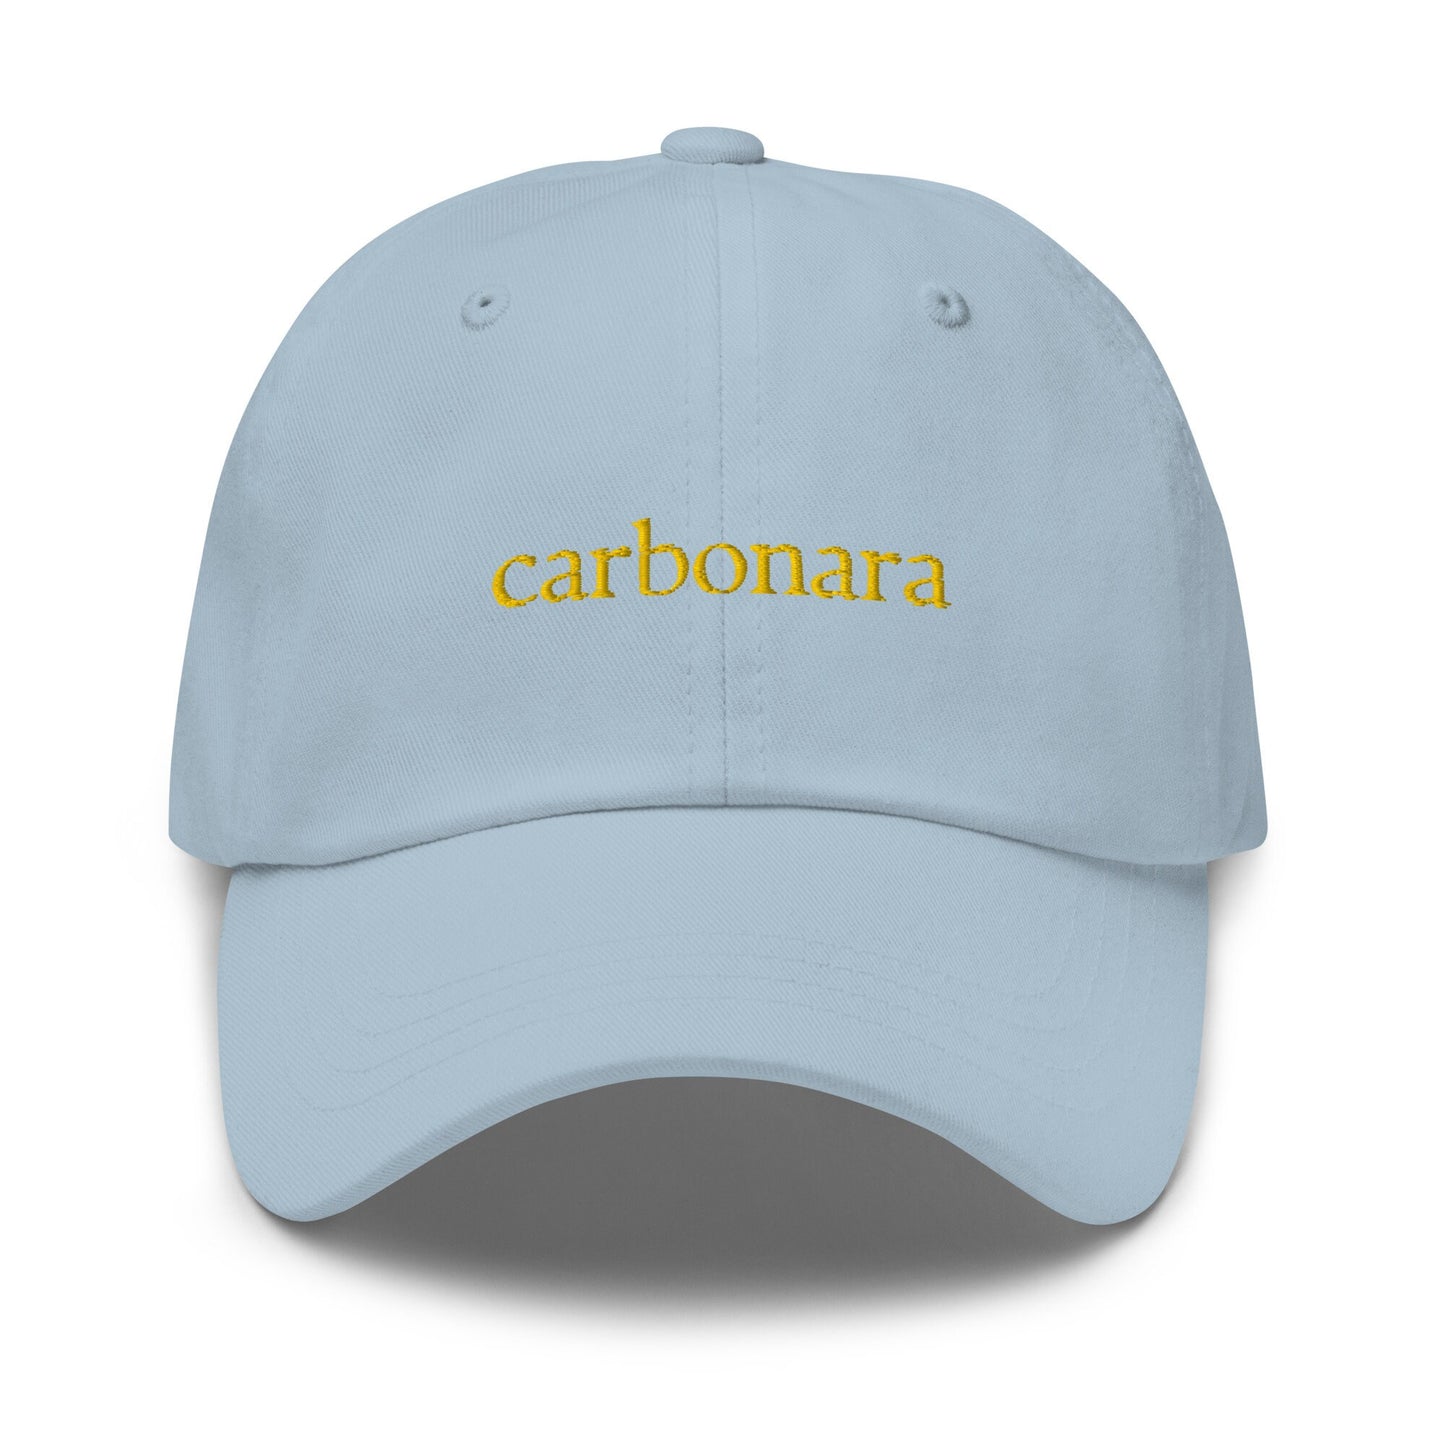 Carbonara Hat - Authentic Italian Food Fan gift - Pasta Carbonara Stans Only- Cotton embroidered Cap